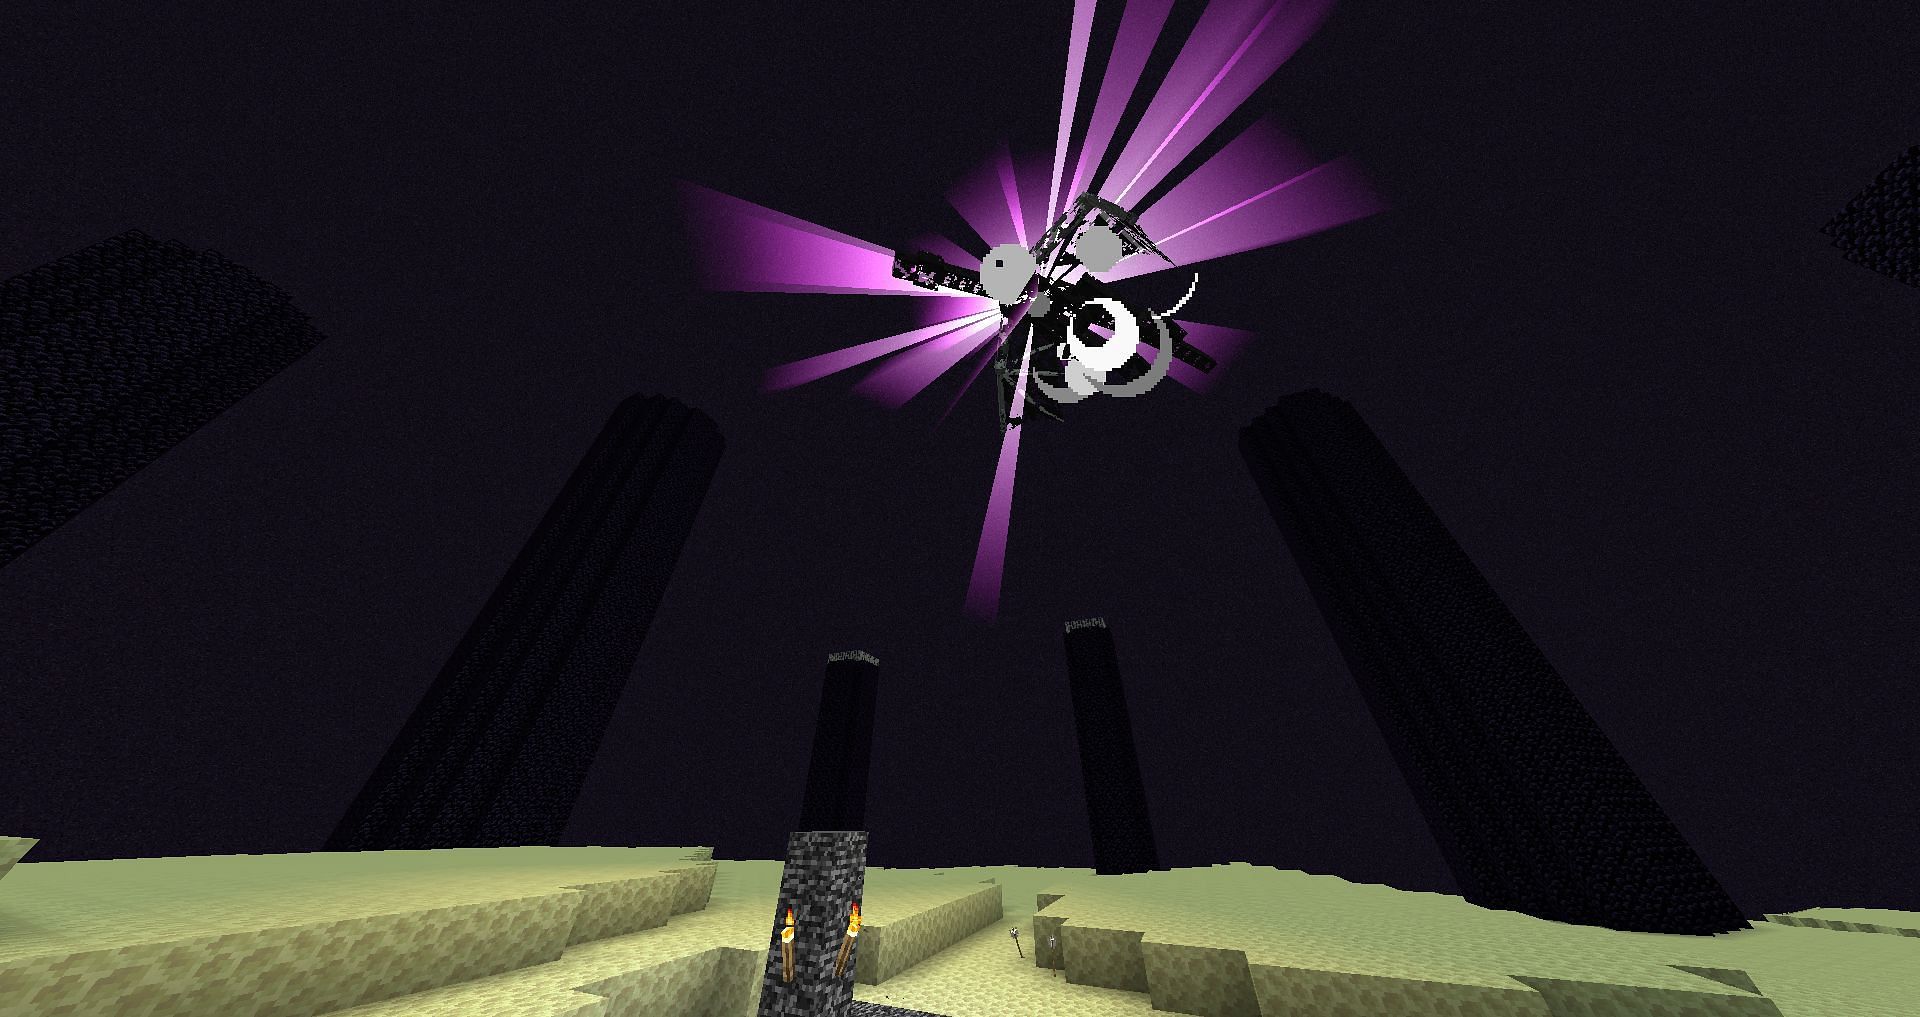 Beating the Ender Dragon (Image via Minecraft Wiki)